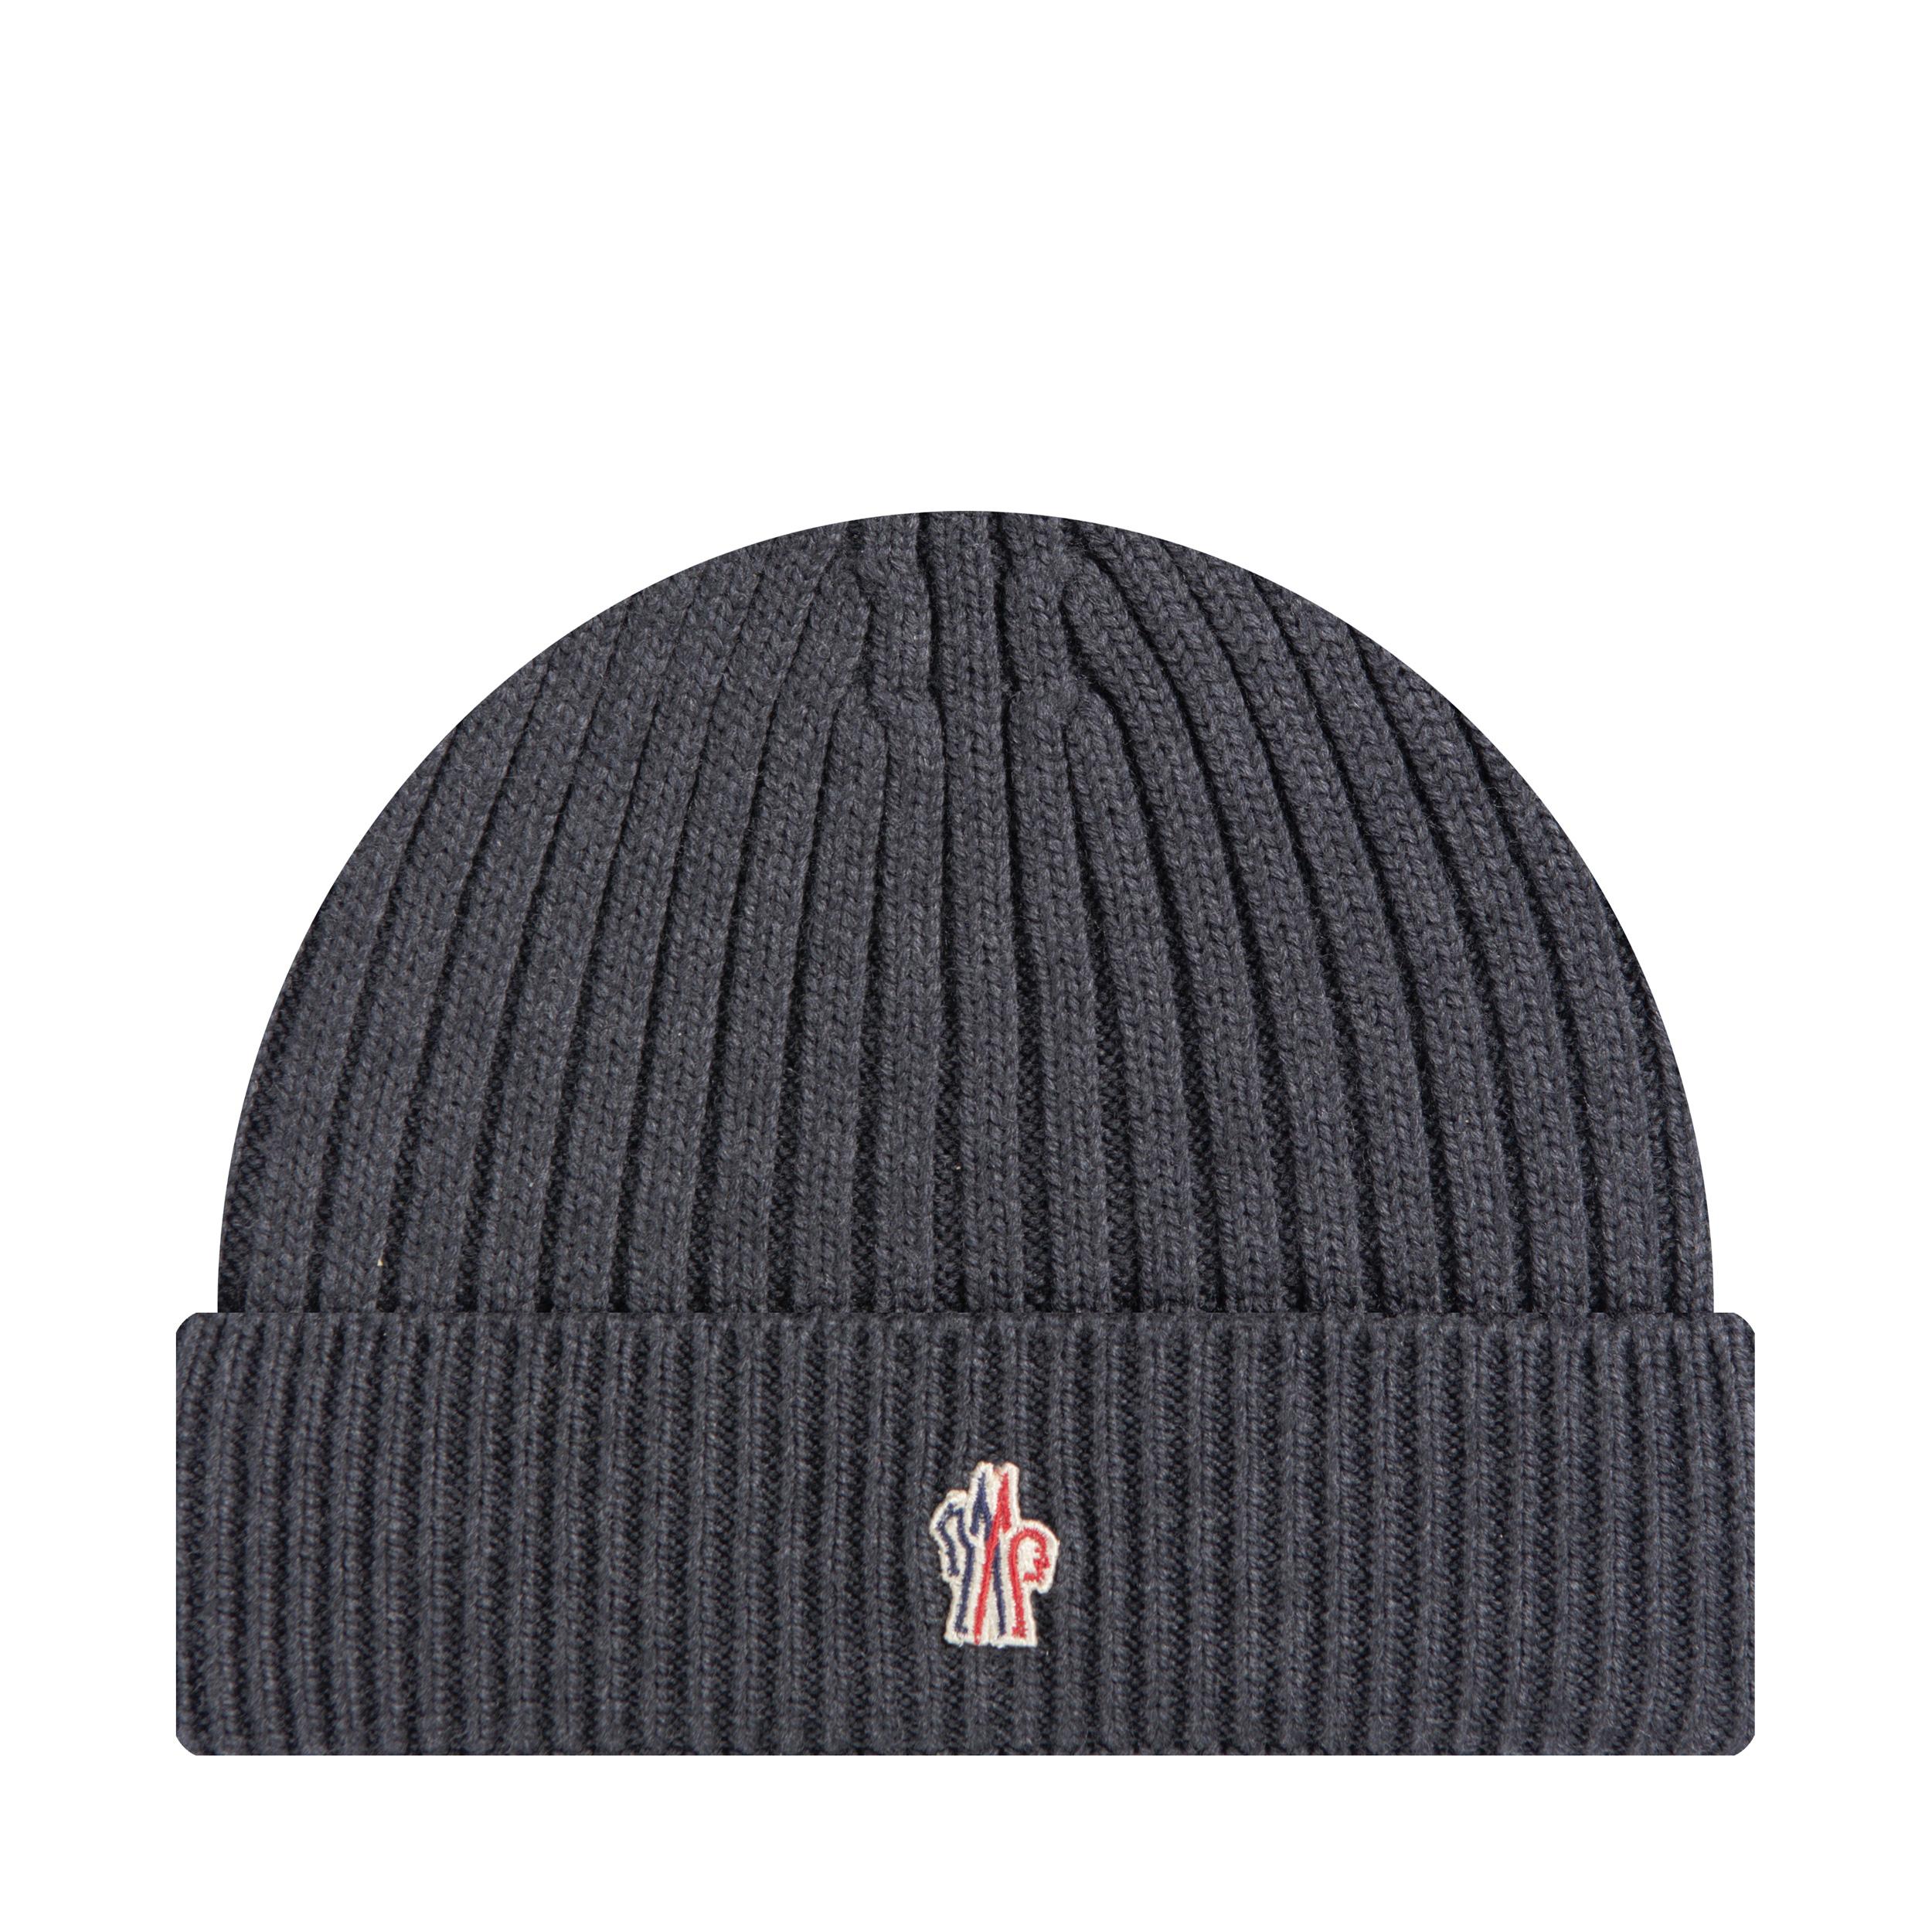 Moncler Grenoble 'ribbed Wool' Beanie Hat Grey in Gray for Men - Lyst